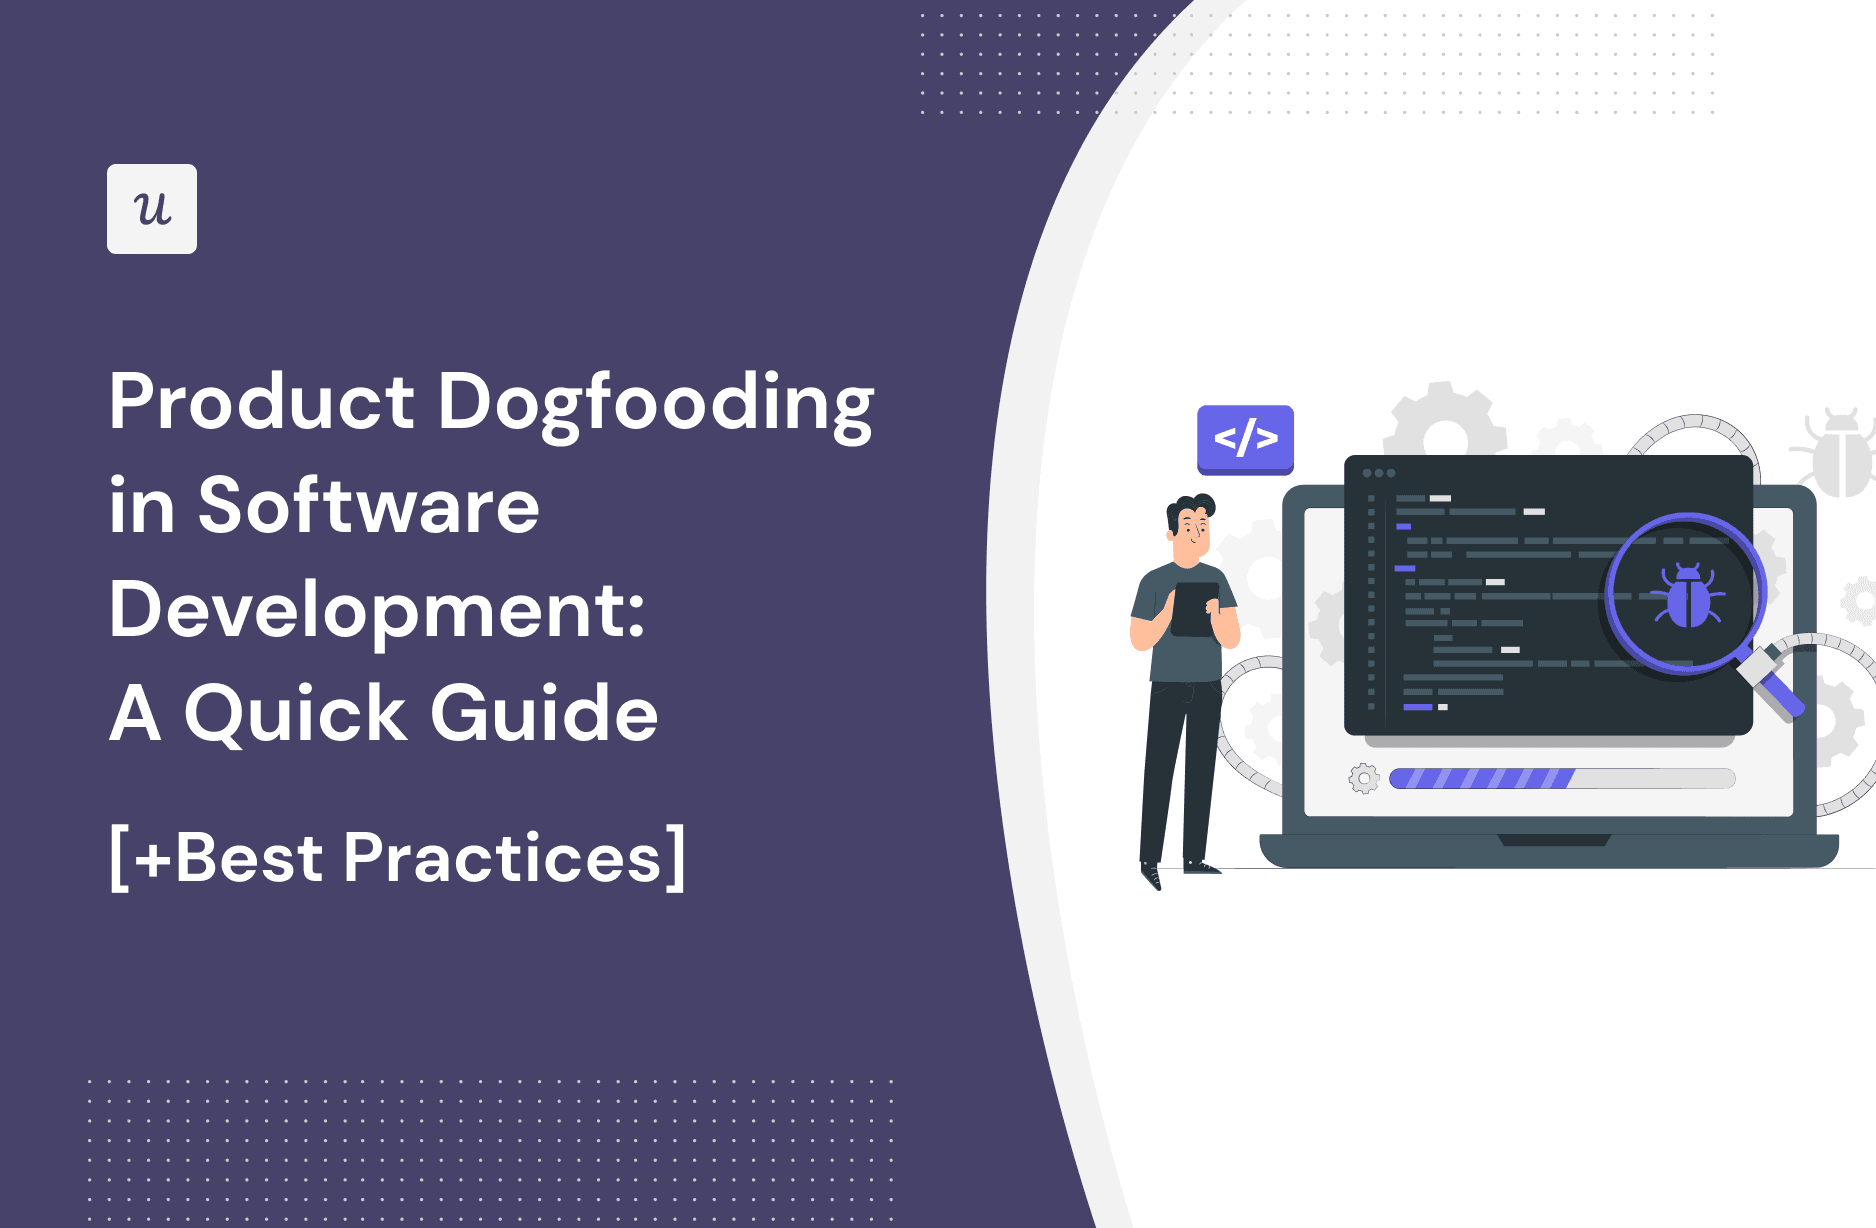 Product Dogfooding in Software Development: A Quick Guide (+Best Practices) cover